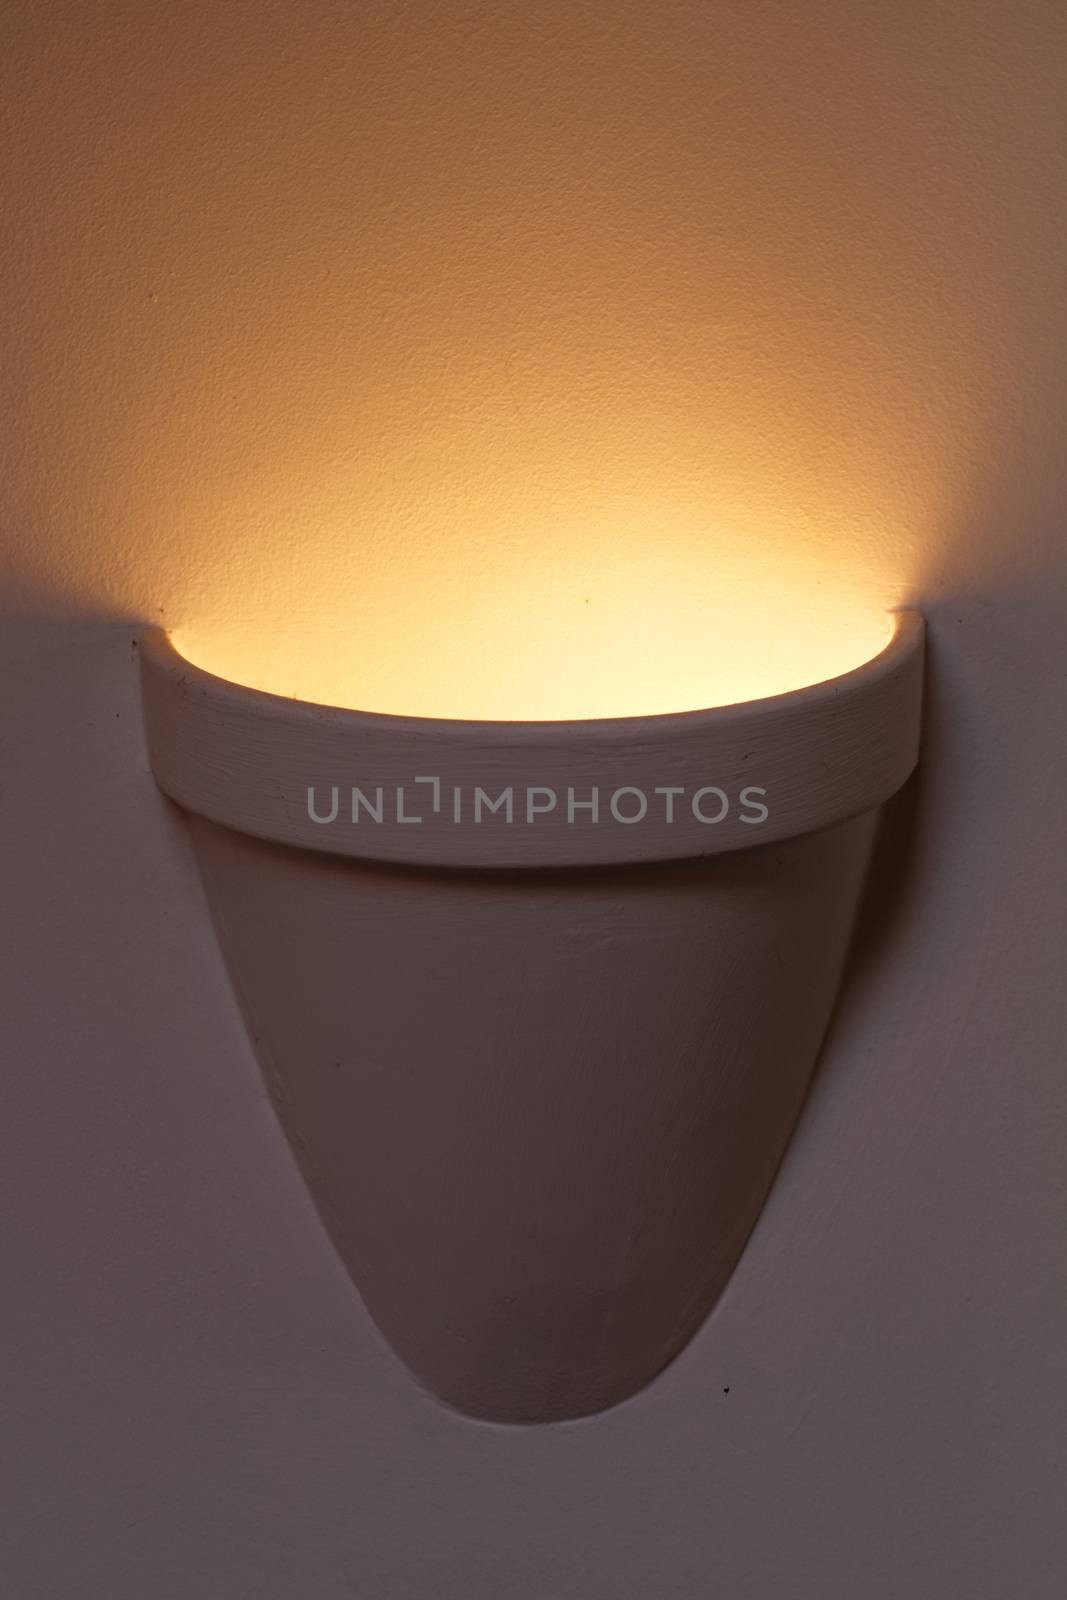 Photo of a lamp in a pots